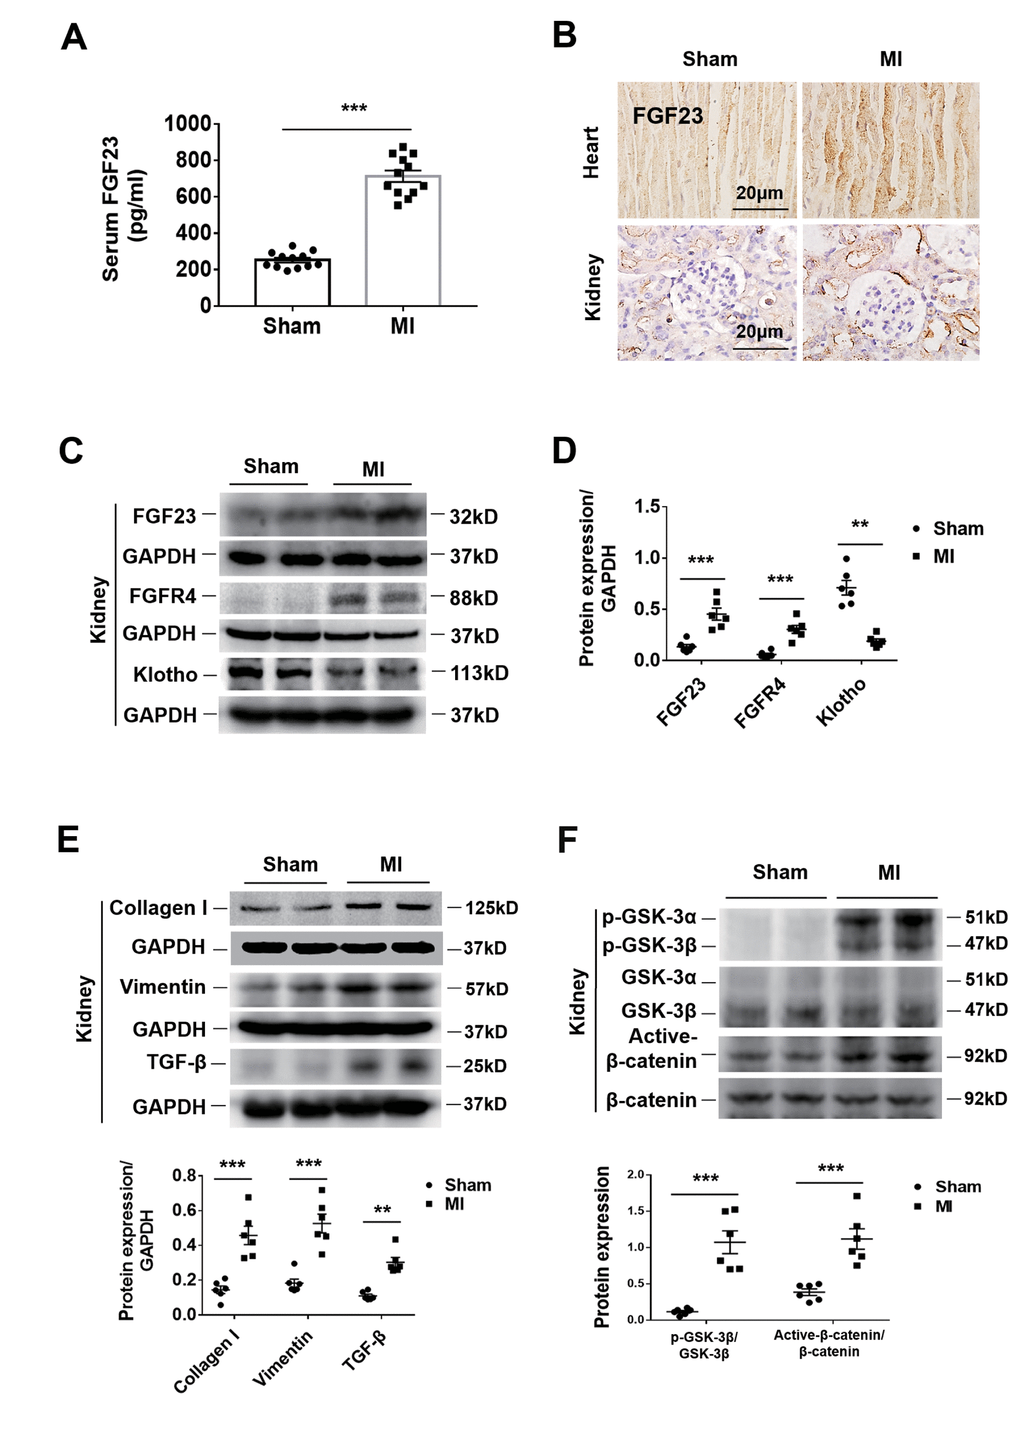 Upregulation of FGF23 in the heart and kidneys and activation of fibrosis-related signaling pathways in the kidneys by cardiorenal syndrome (CRS) at 12 weeks after induction of MI. (A) Serum FGF23 level measured by ELISA. ***P B) Immunohistochemical staining shows enhanced FGF23 Protein expression in the myocardium and renal tubules of CRS mice compared with sham mice. (C) Western blot of FGF23, FGFR4 and Klotho in the kidneys of Sham and CRS mice. (D) Semi-quantitative assessment of FGF23, FGFR4 and Klotho. **P ***P E) Western blot of collagen I, vimentin and TGF-β. **P ***P F) Western blotting reveals significant upregulation of p-GSK-3β and active-β-catenin protein expression in the kidneys of CRS mice. ***P 